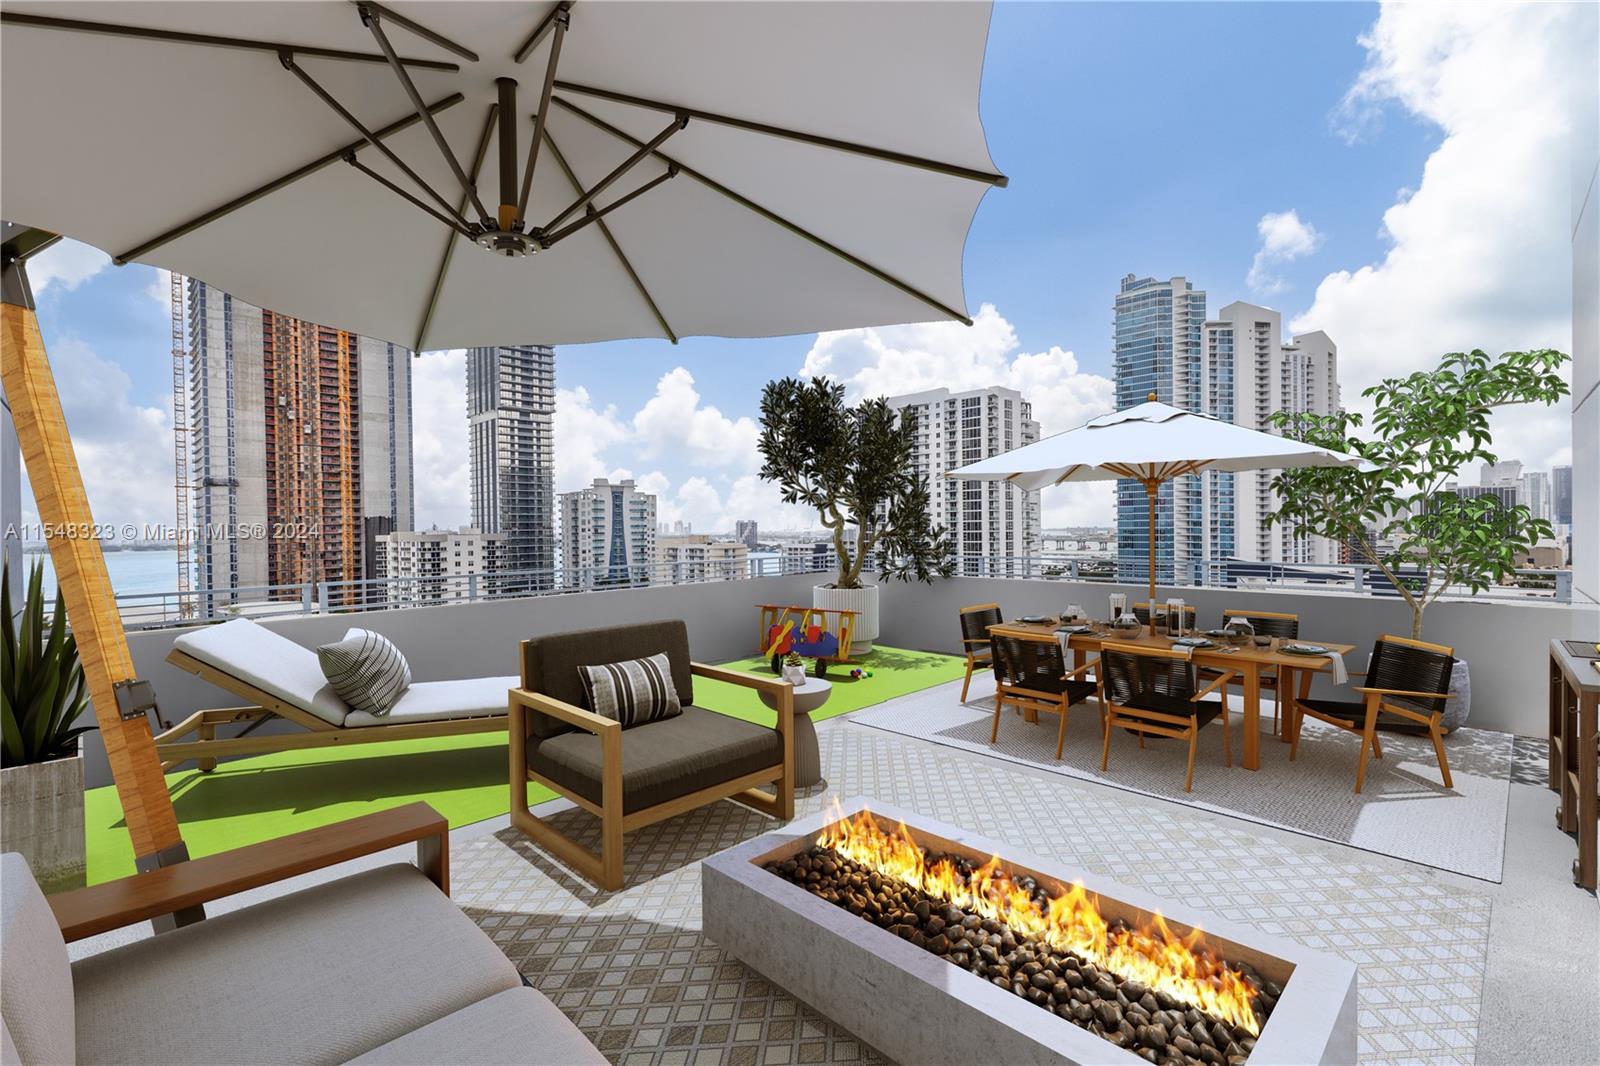 Discover urban living with Penthouse 2 at City 24, located in the heart of Edgewater. This 2BR/2Bath residence boasts a sprawling 1000 sq ft rooftop terrace PLUS 3 additional balconies with city & water views, perfect for entertaining or private relaxation. With 2 dedicated parking spaces, parking is a breeze. Located in a vibrant neighborhood, this location has convenience and accessibility to Miami's finest dining, shopping, and cultural experiences. Wynwood and Midtown are just blocks away as it the Arts and Entertainment area of Miami. The building, known for its s strong finances &  meticulous maintenance, provides residents with a suite of amenities that enhance the living experience. The penthouses are only 6 units on its private level accessible with special elevator access.